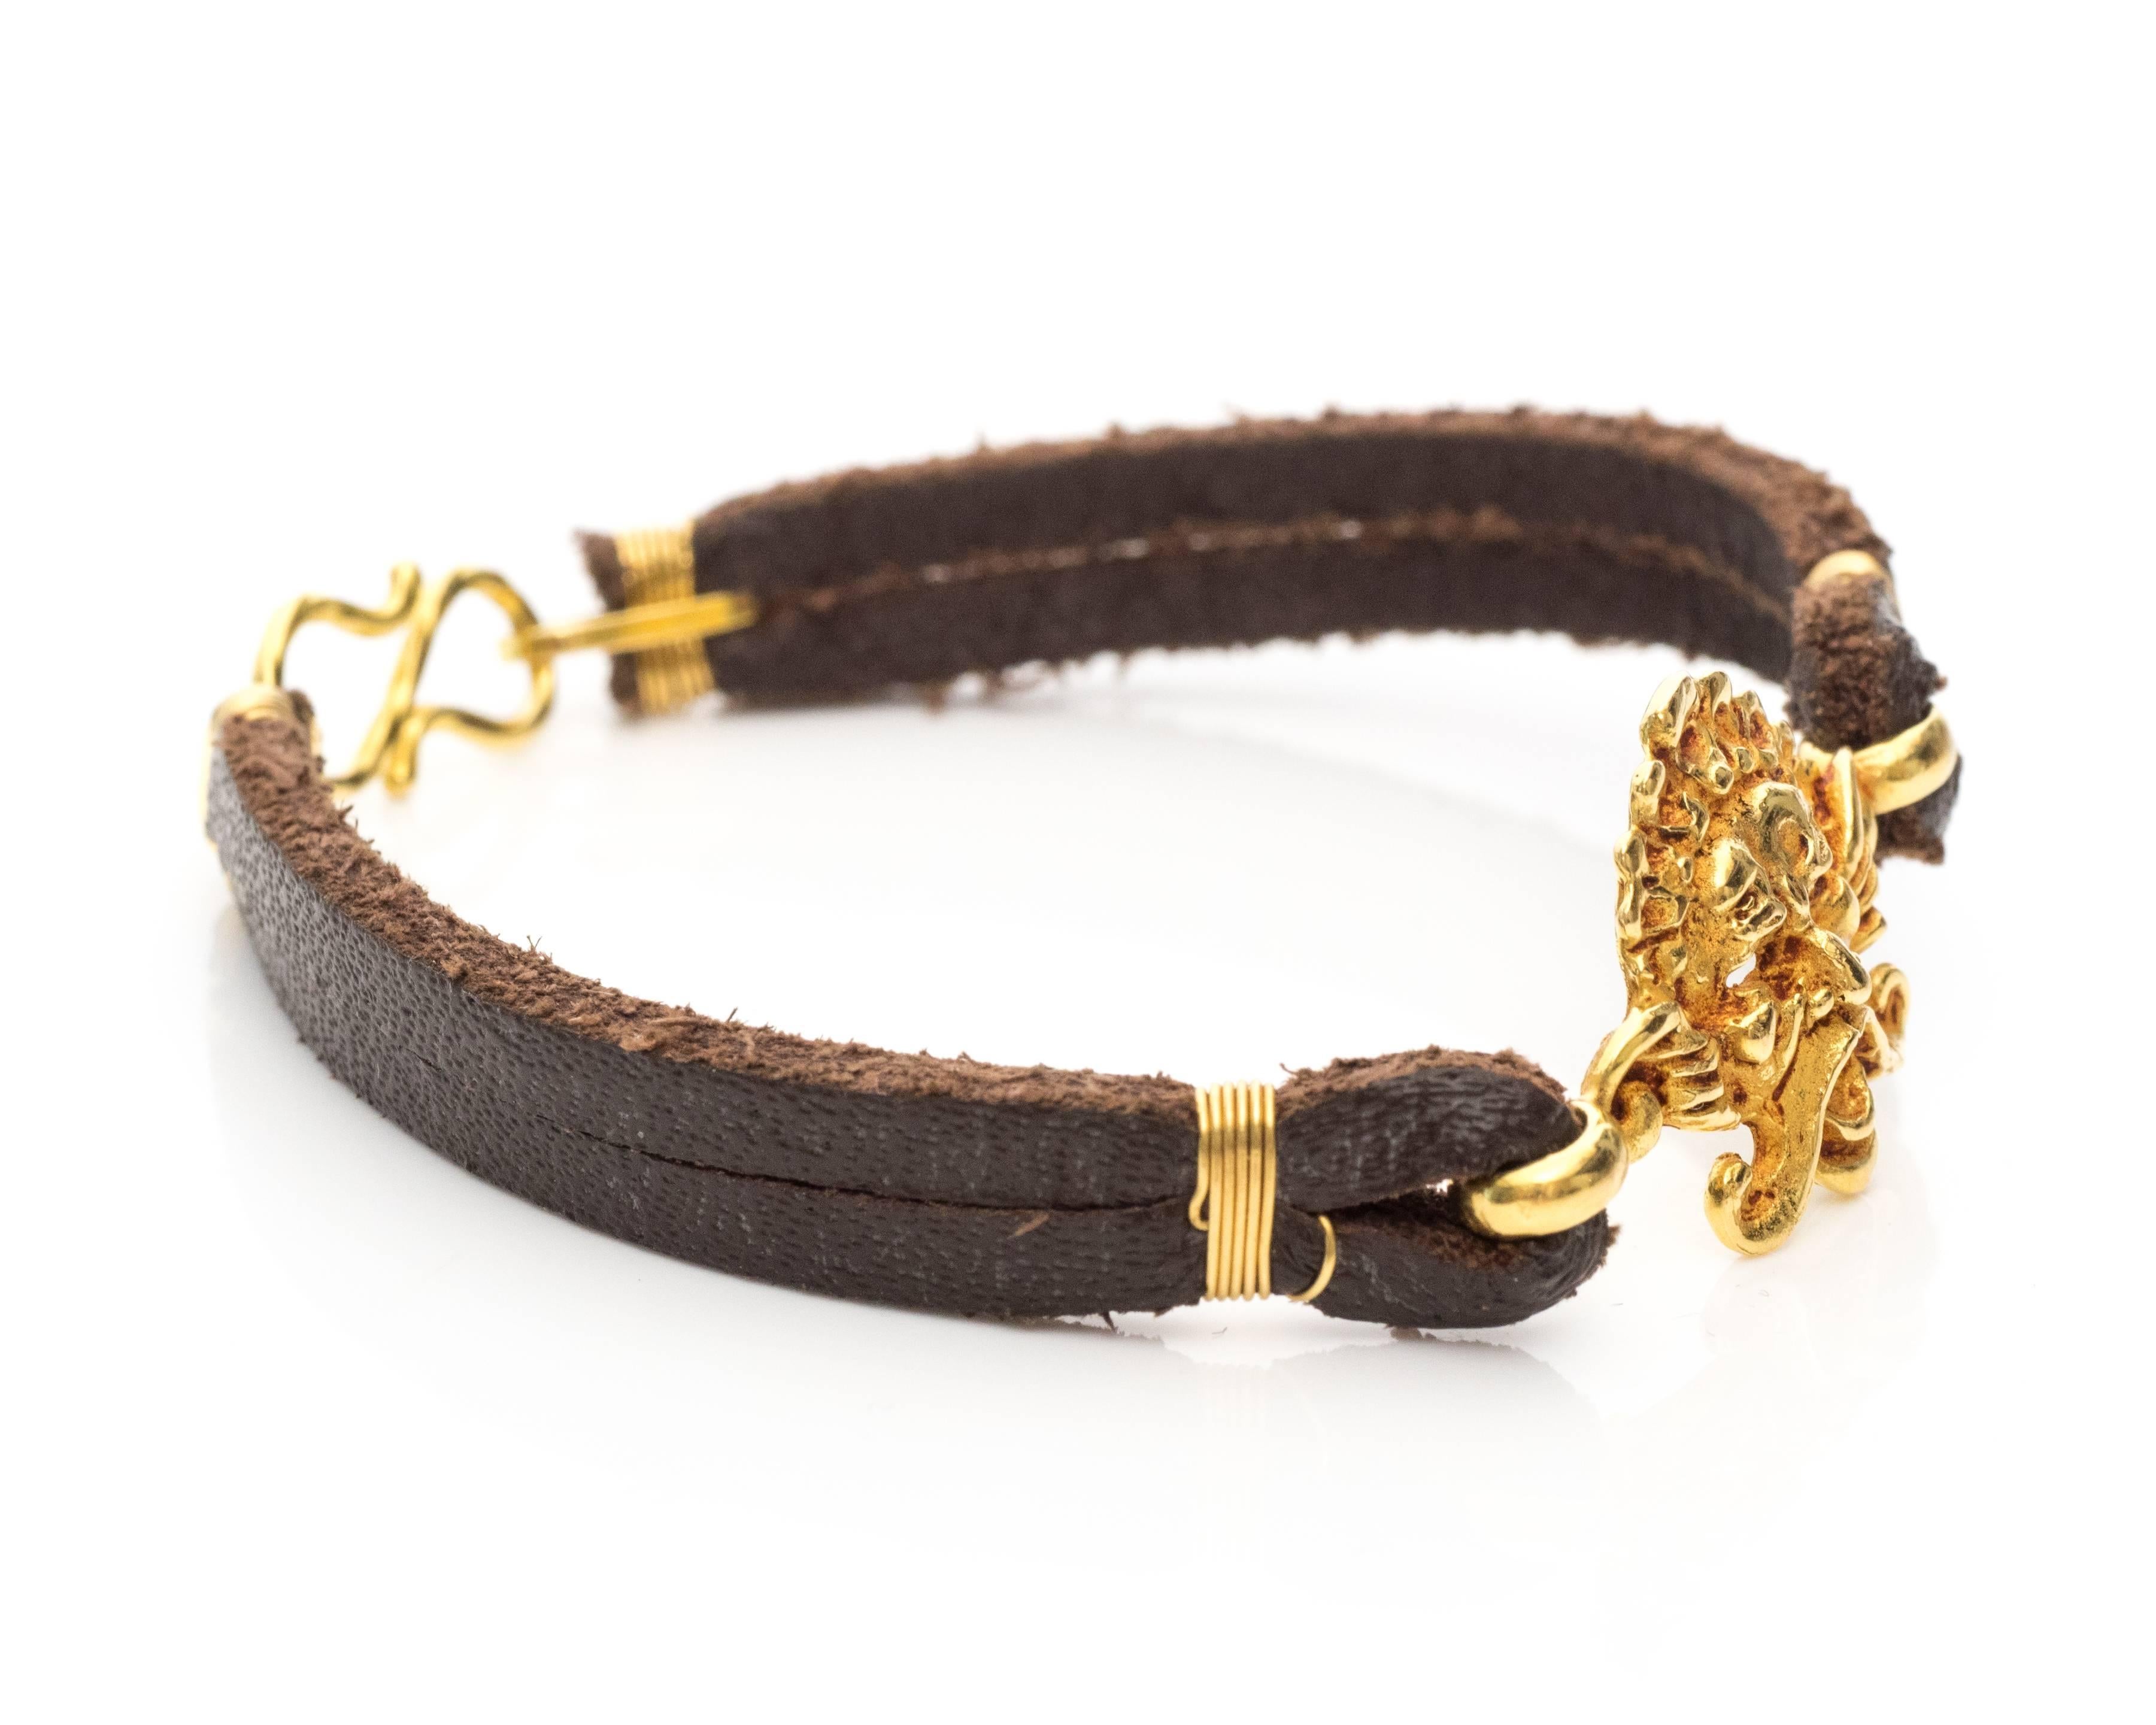 We love this fun and unique bracelet! It was handmade by a jewelry artisan and features a leather band with an S-lock clasp and a 22 karat yellow gold character mask. This bracelet will fit a 7 inch wrist  and weighs 9.6 grams.

Item Details:
Metal: